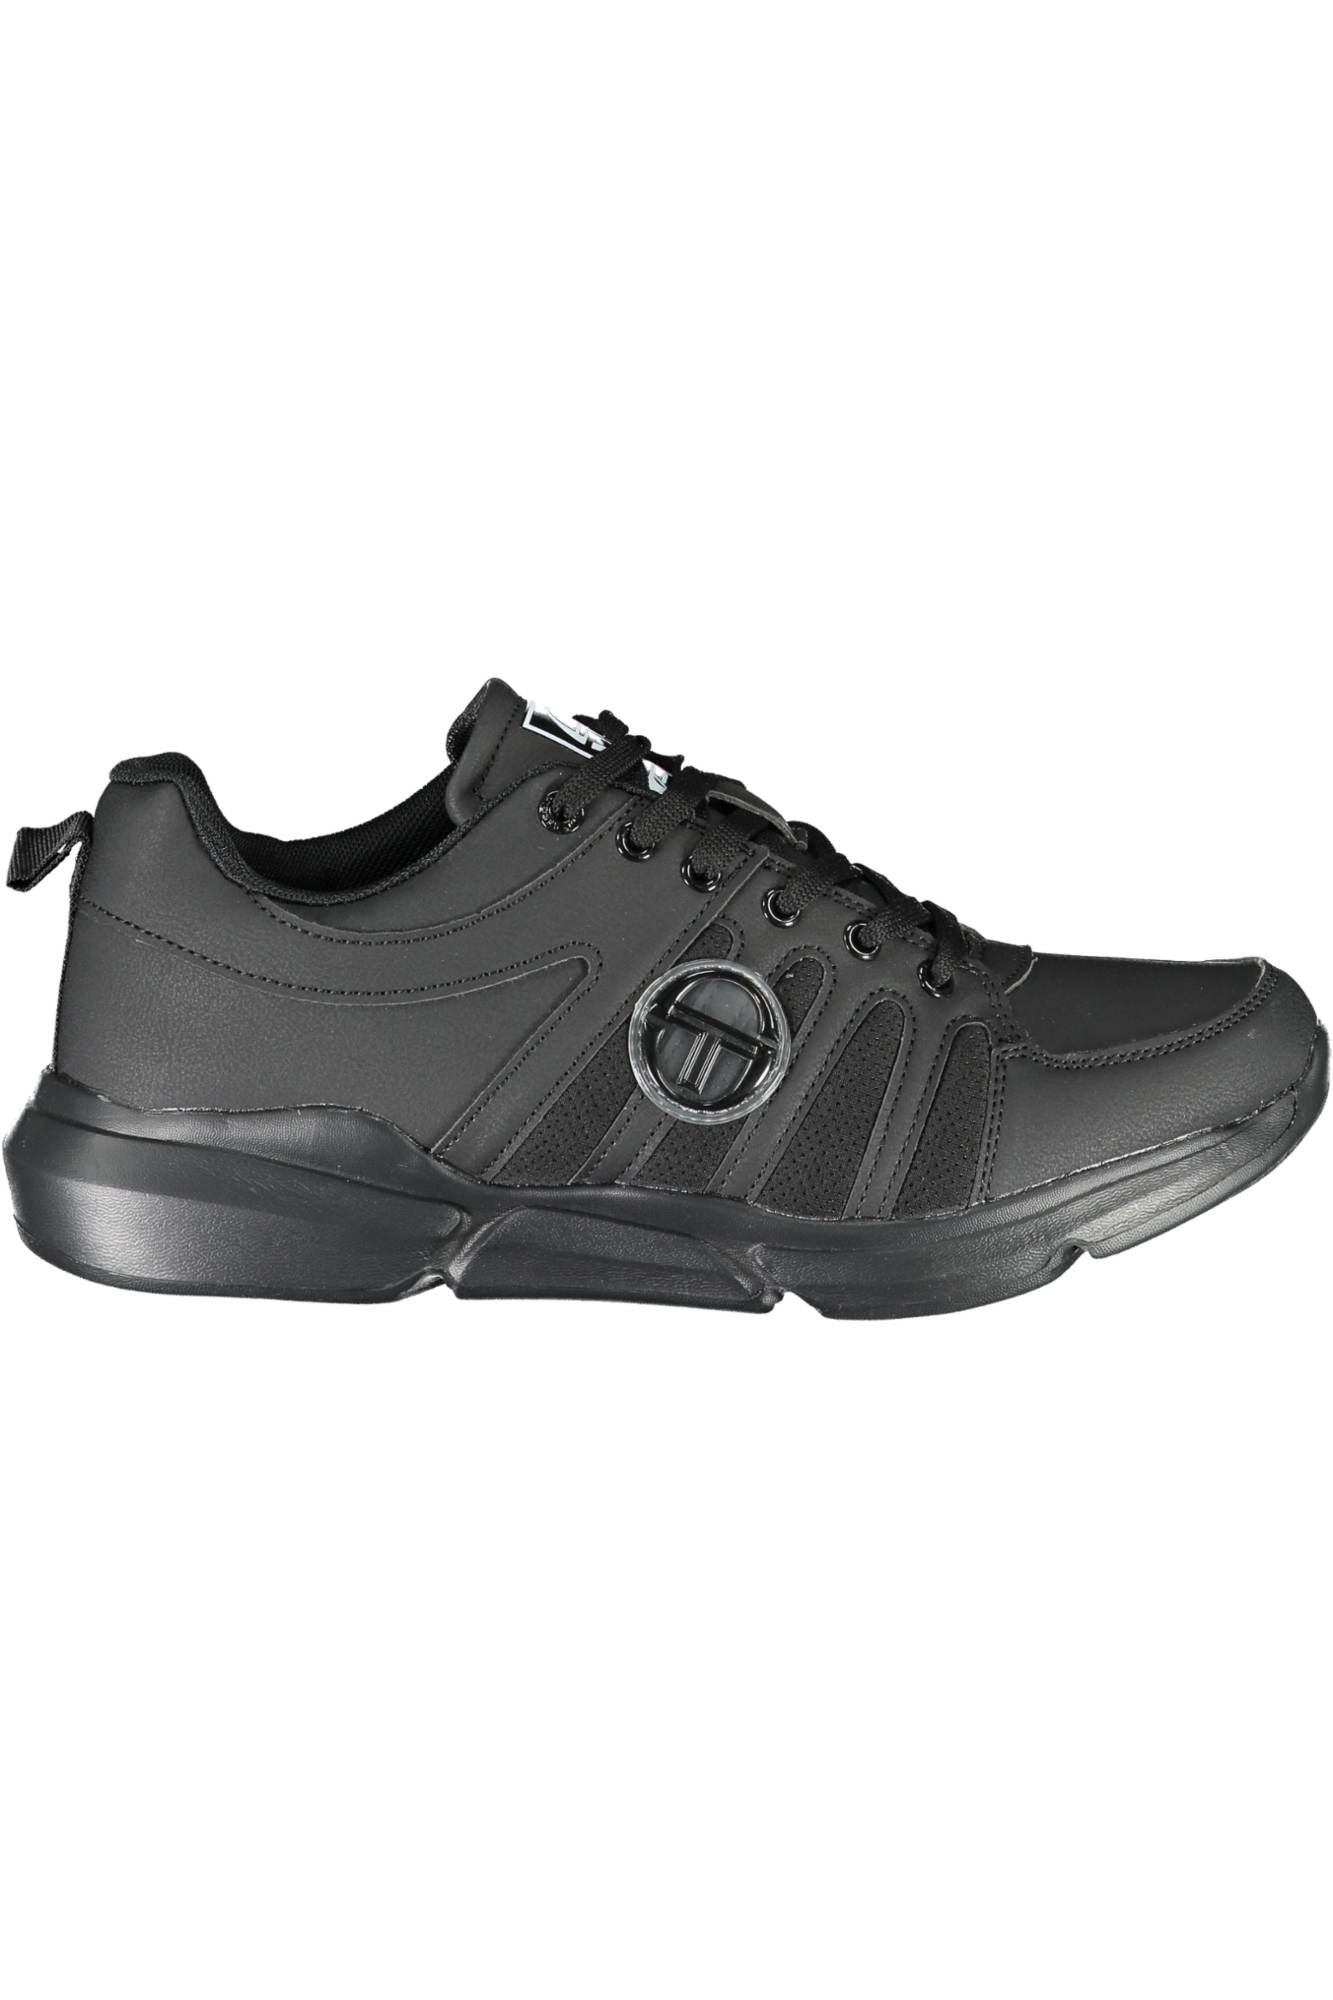 Sergio Tacchini Sleek Black Sports Sneakers with Contrasting Details